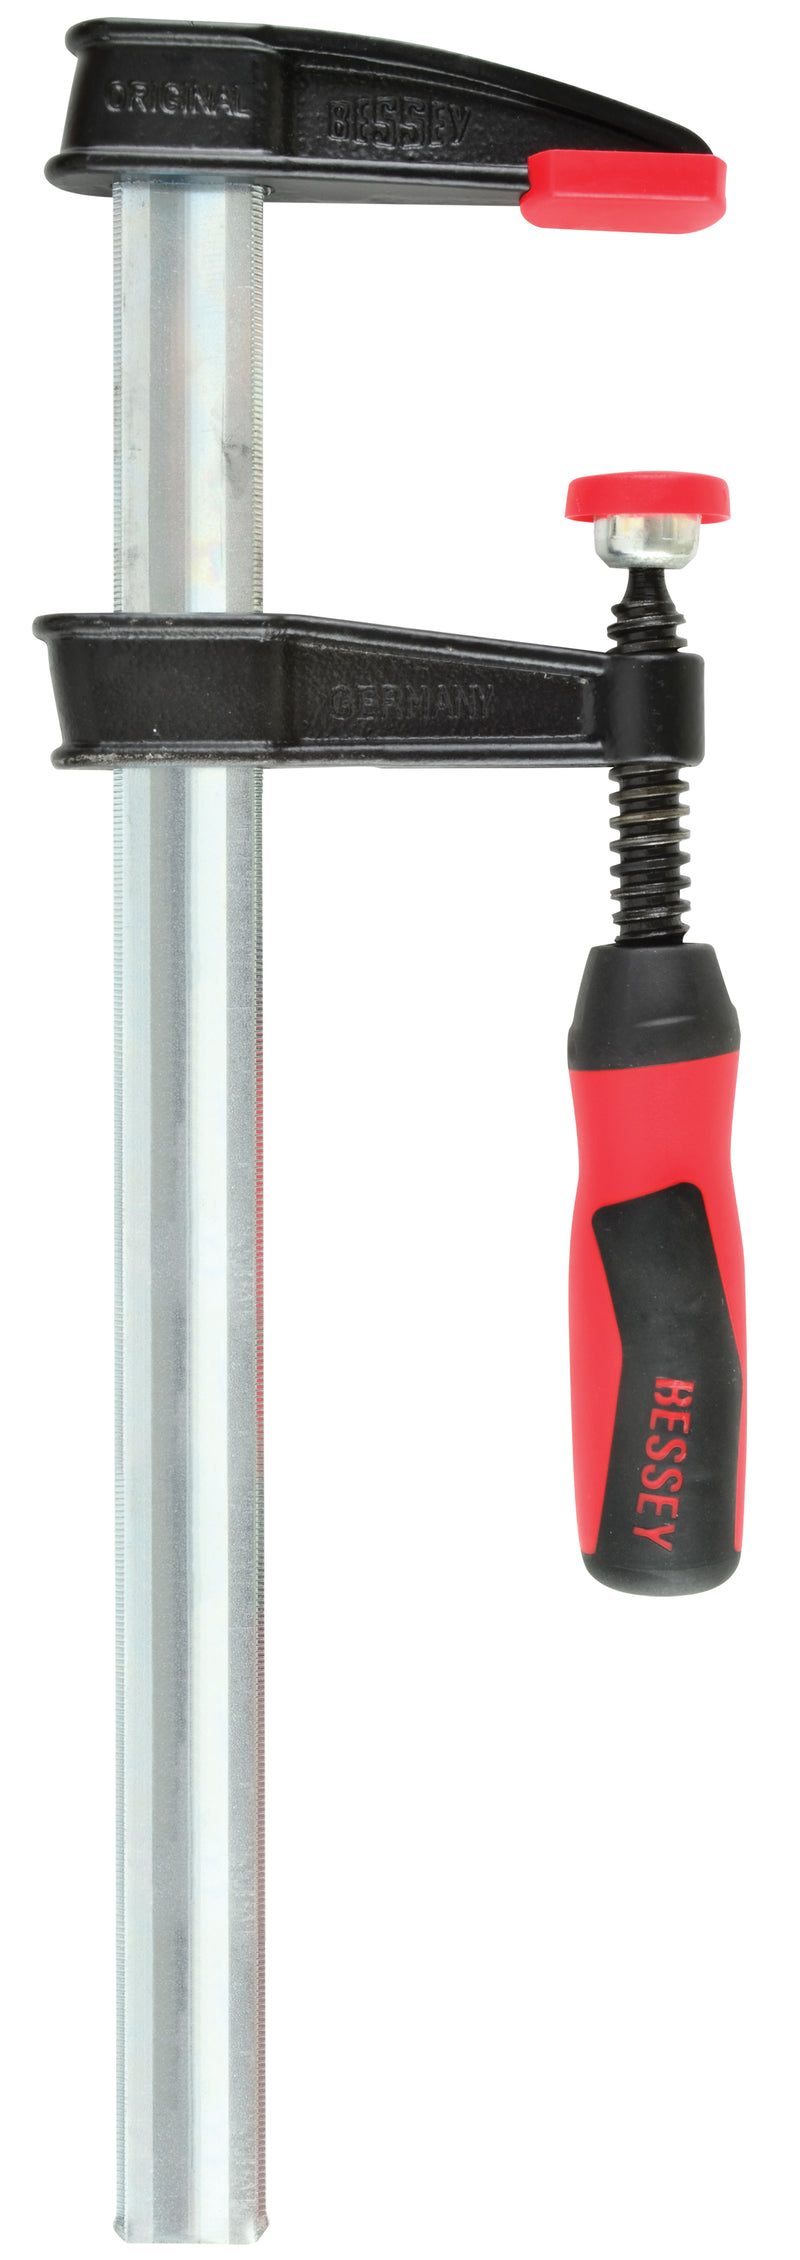 Bessey TGJ2.512+2K 12-inch Tradesmen's Malleable Cast Bar Clamps